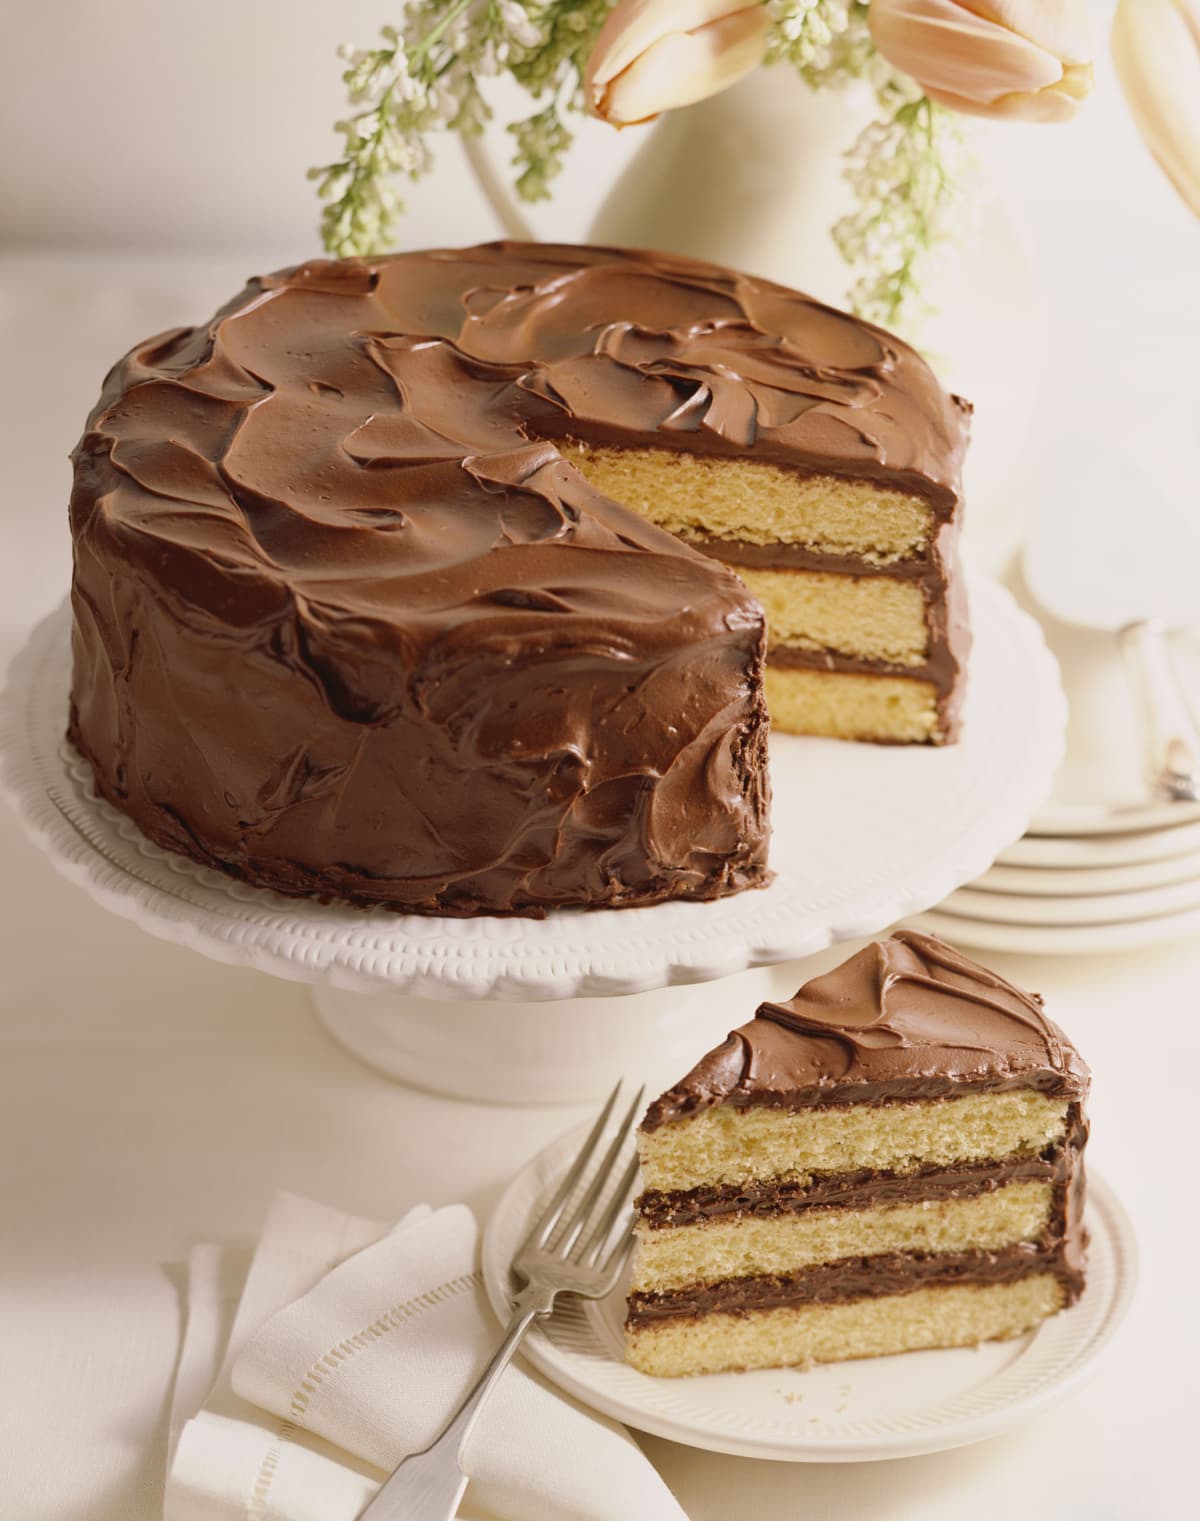 Vanilla layer cake with chocolate frosting